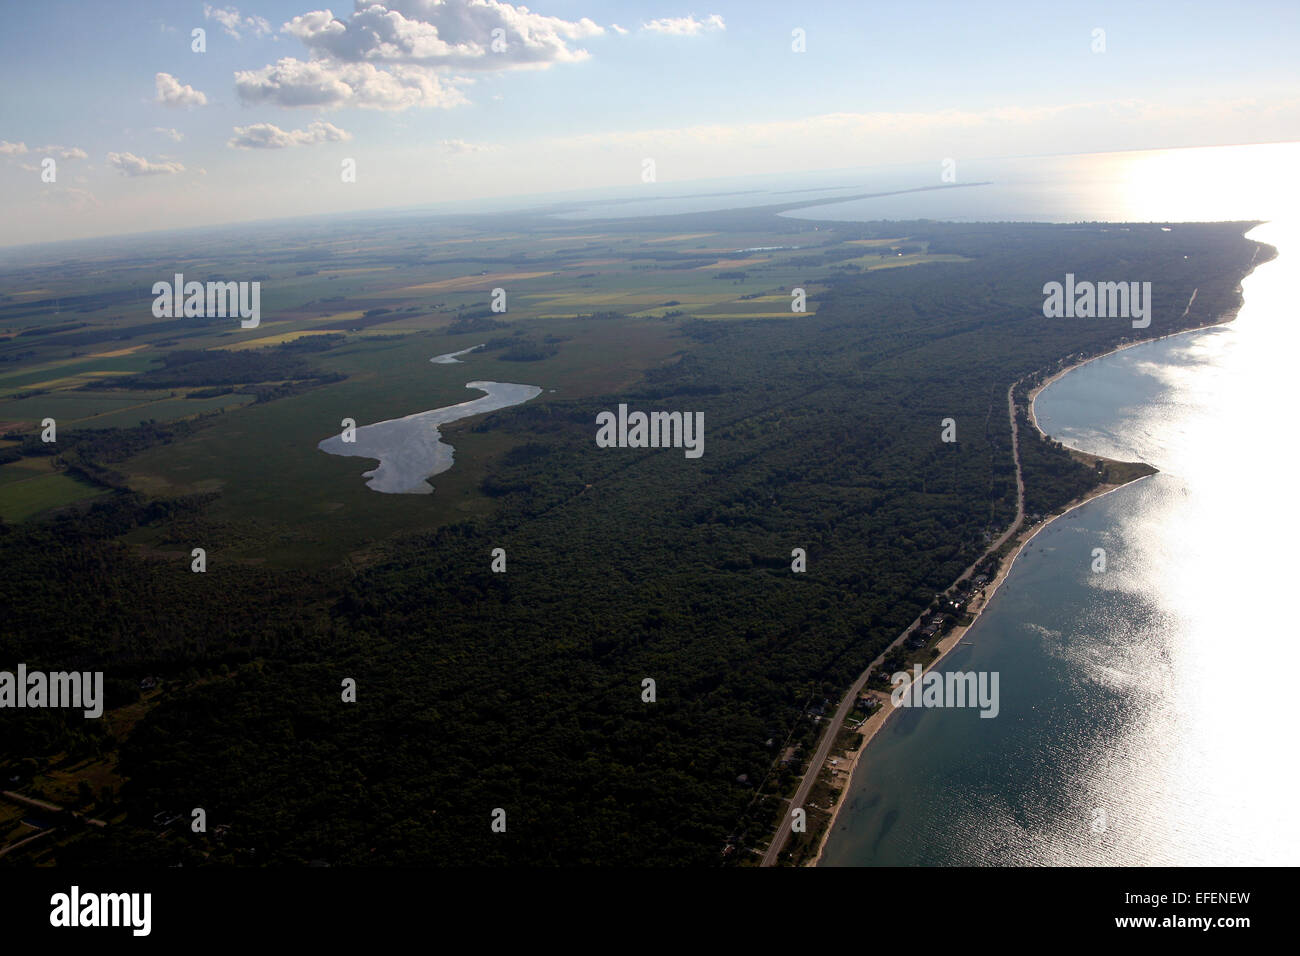 Saginaw Bay, Michigan and adjoining farmland.  Looking towards Wild Fowl Bay. Albert E. Sleeper Park visible in foreground with Stock Photo